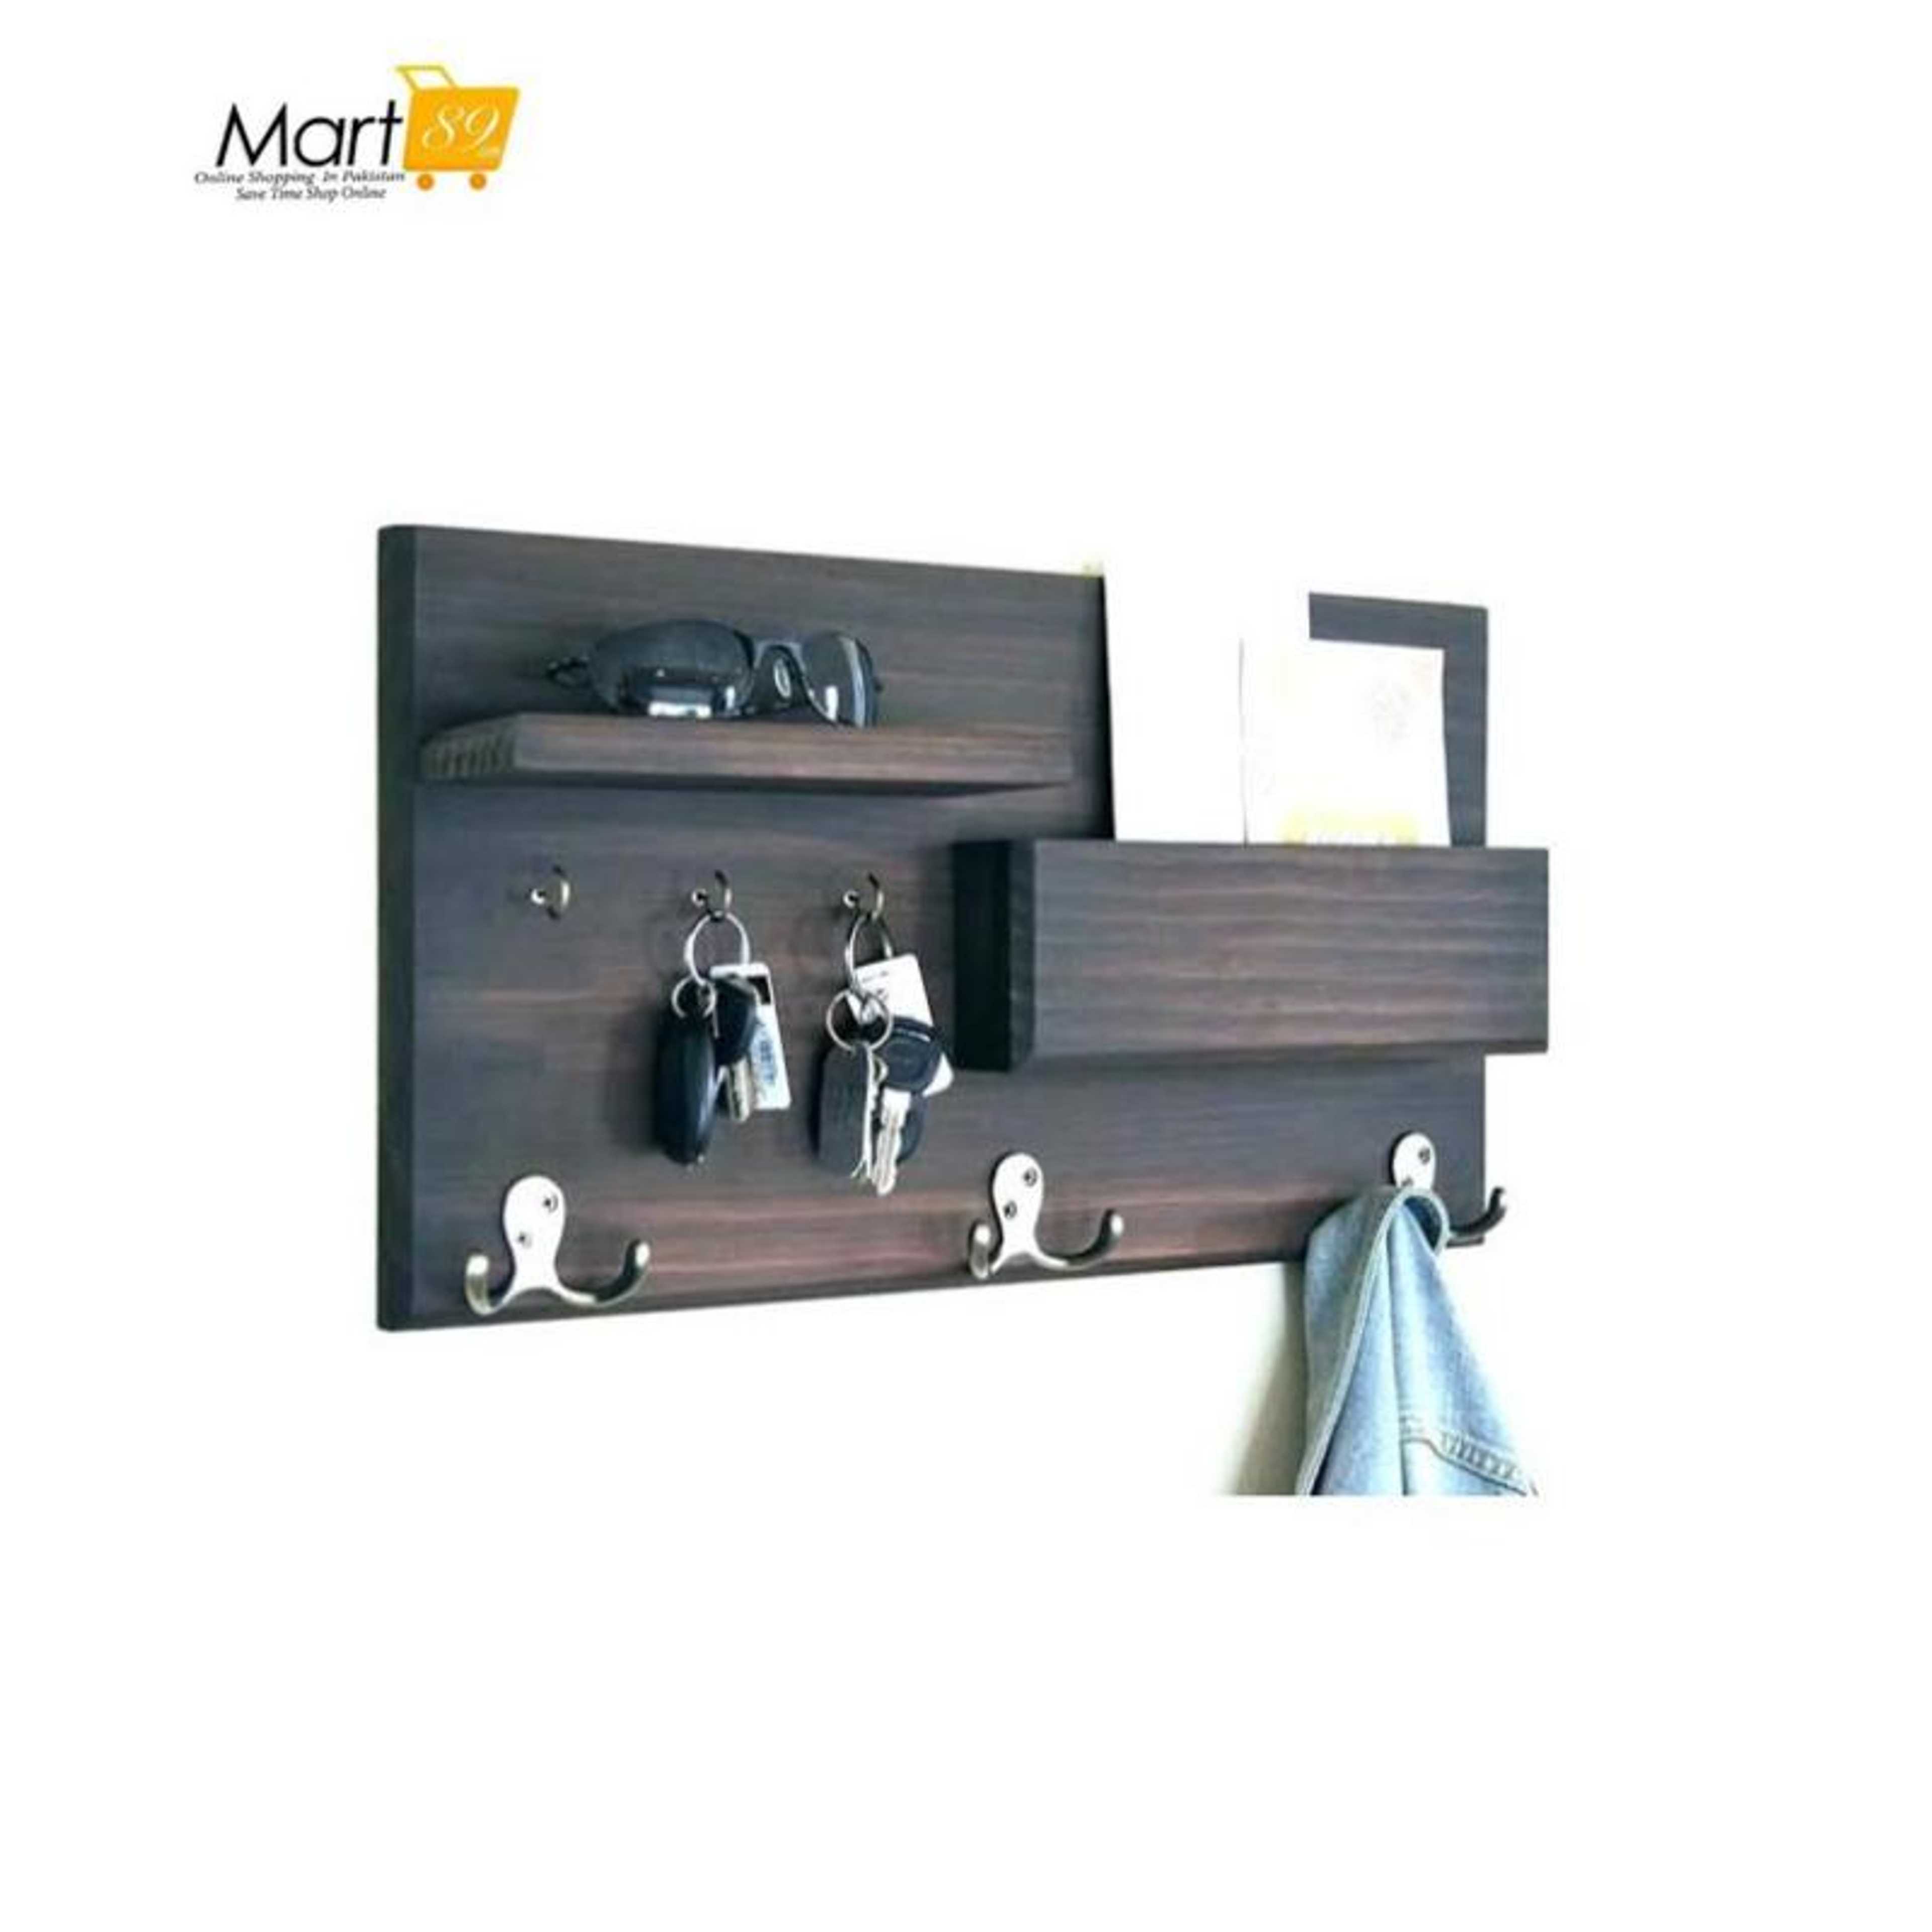 Key Holder Key rack Stand for Wall Office & Home Decorative Antique Design no 0081 Official Mart89 Branded Product